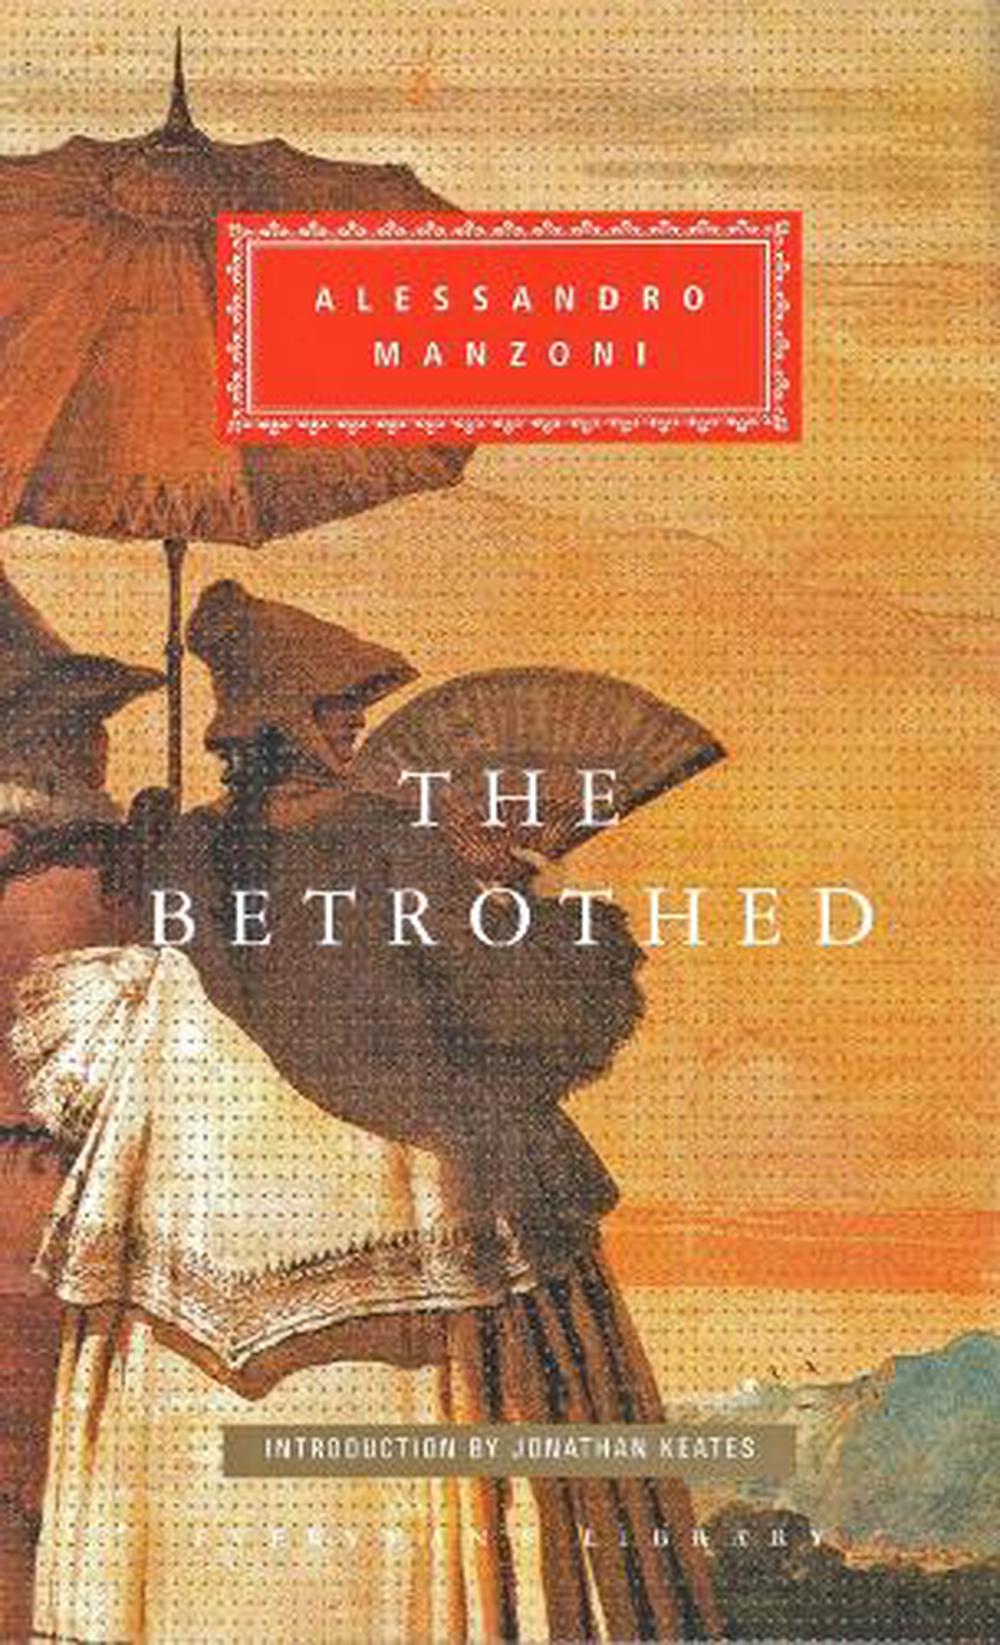 the betrothed by alessandro manzoni